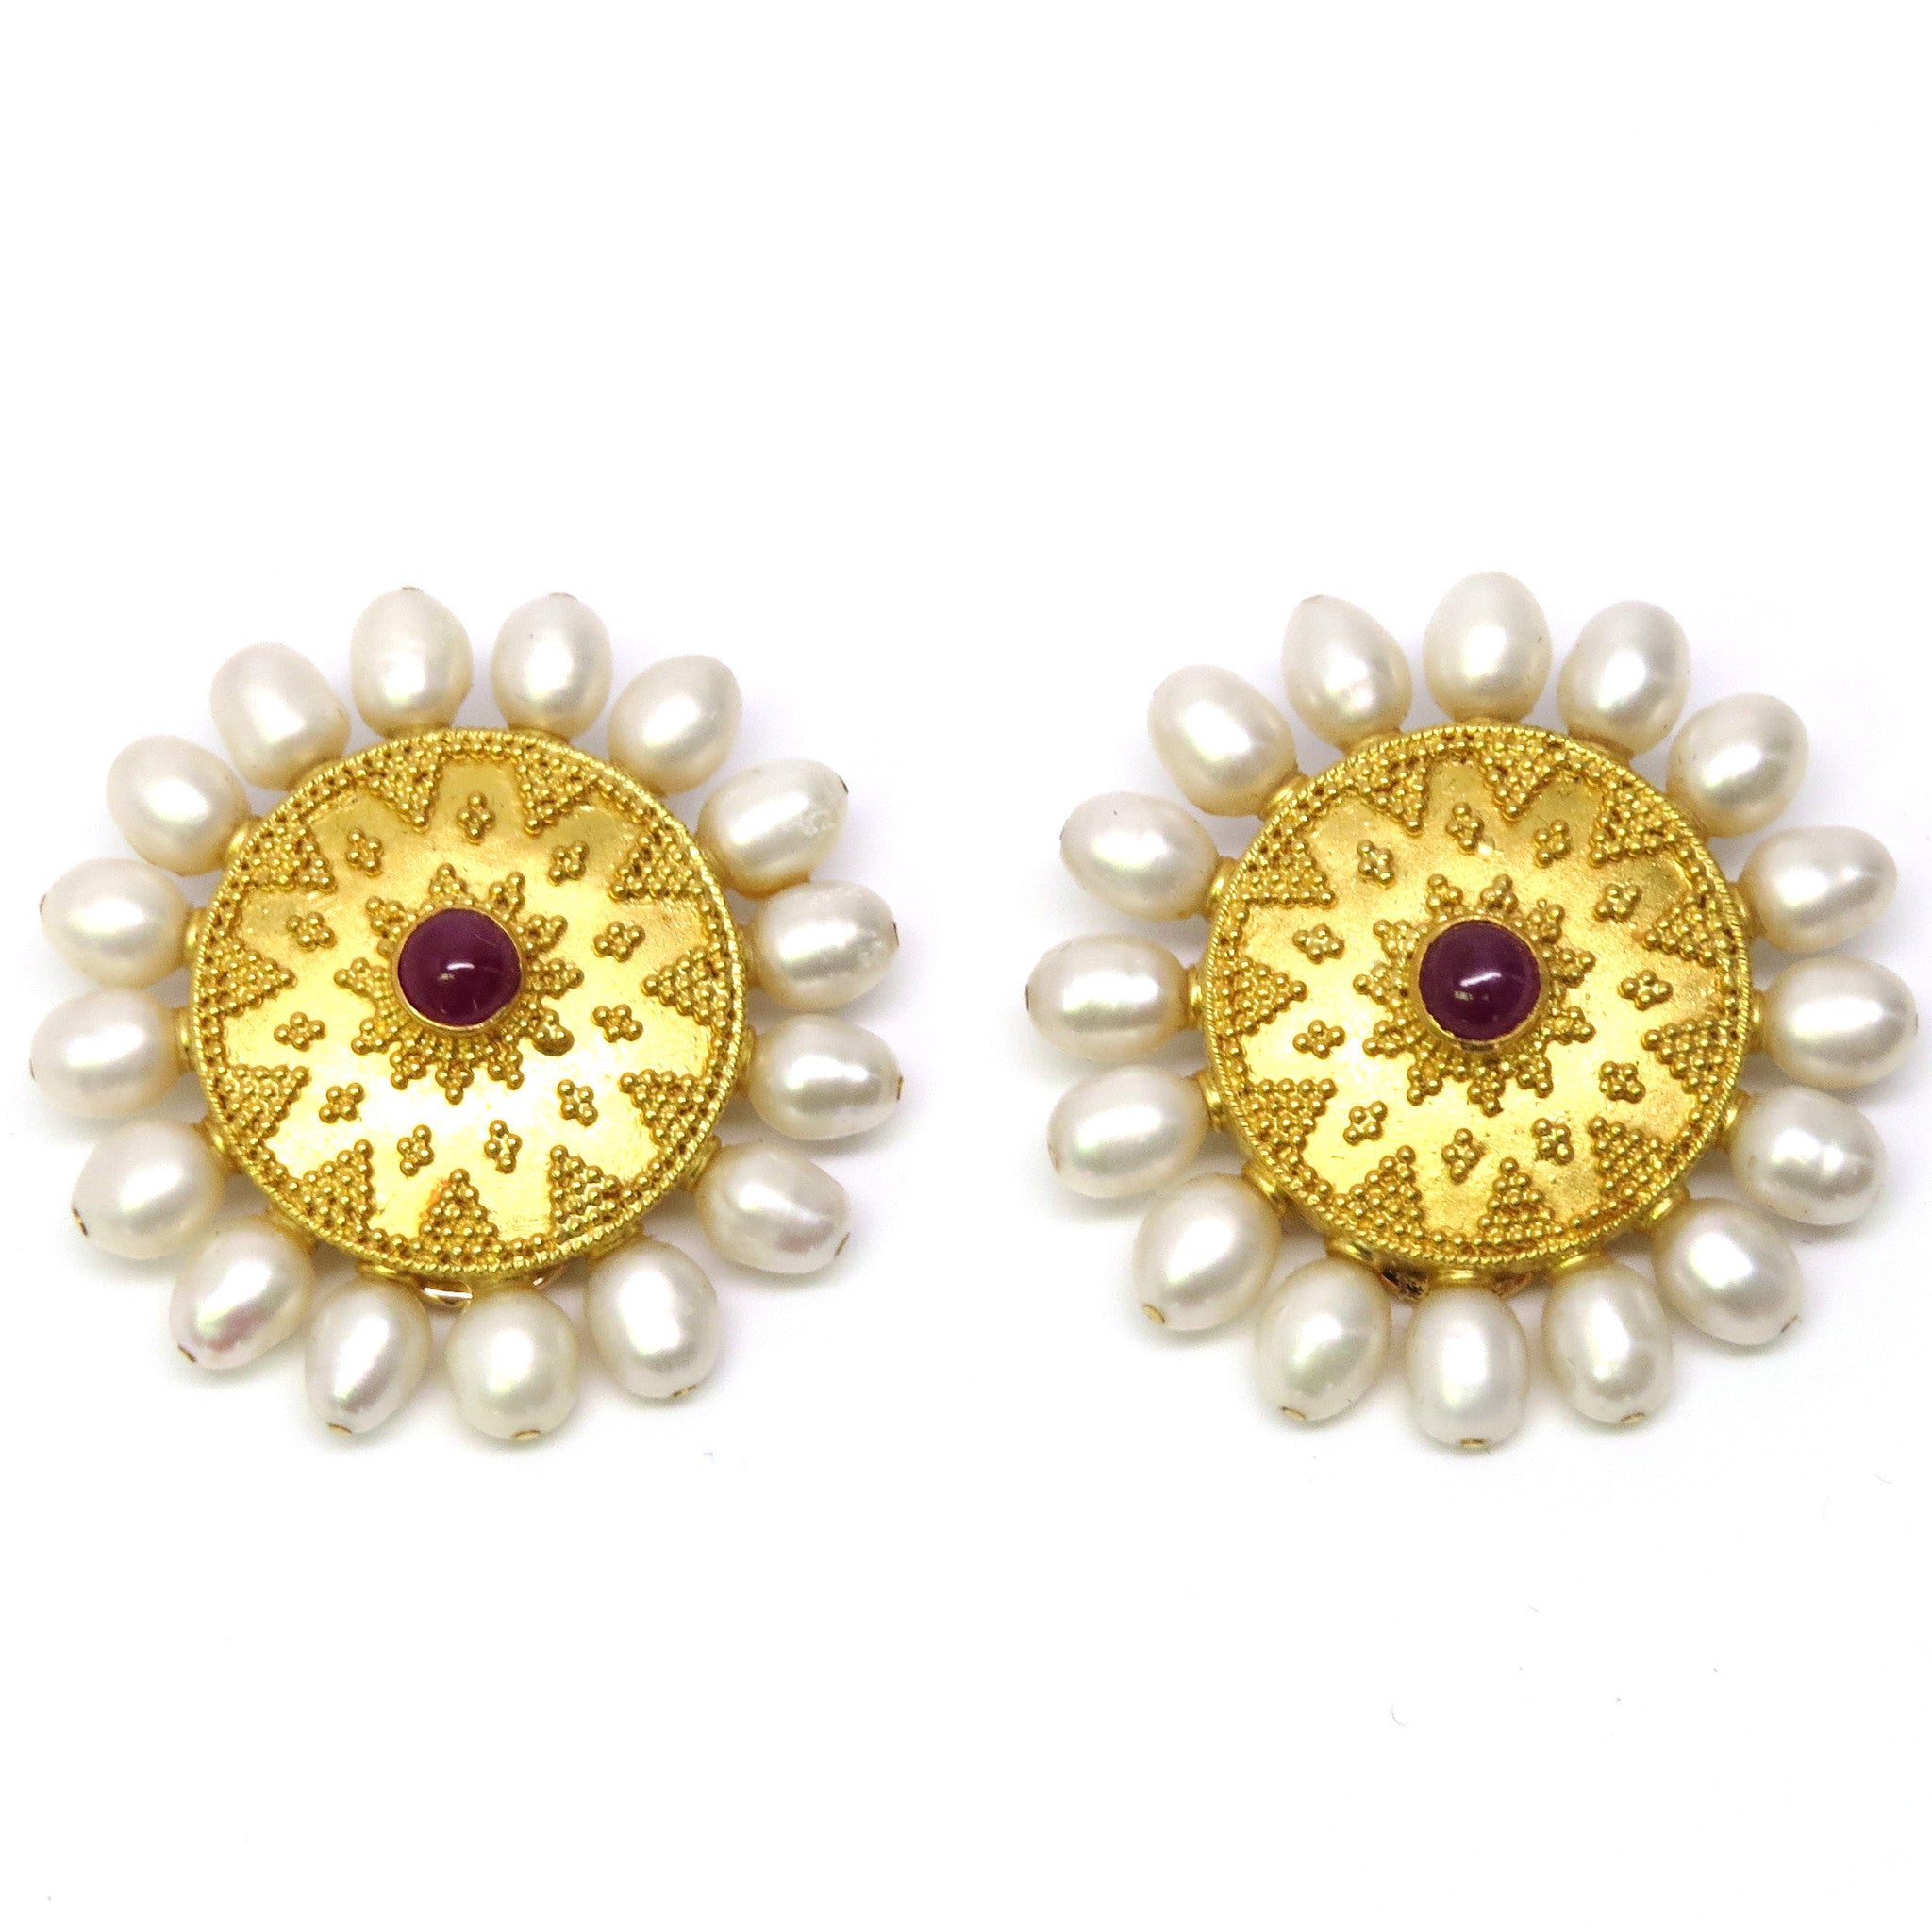 Ilias Lalaounis Greece Gold Ruby Cabochon Pearl Earrings